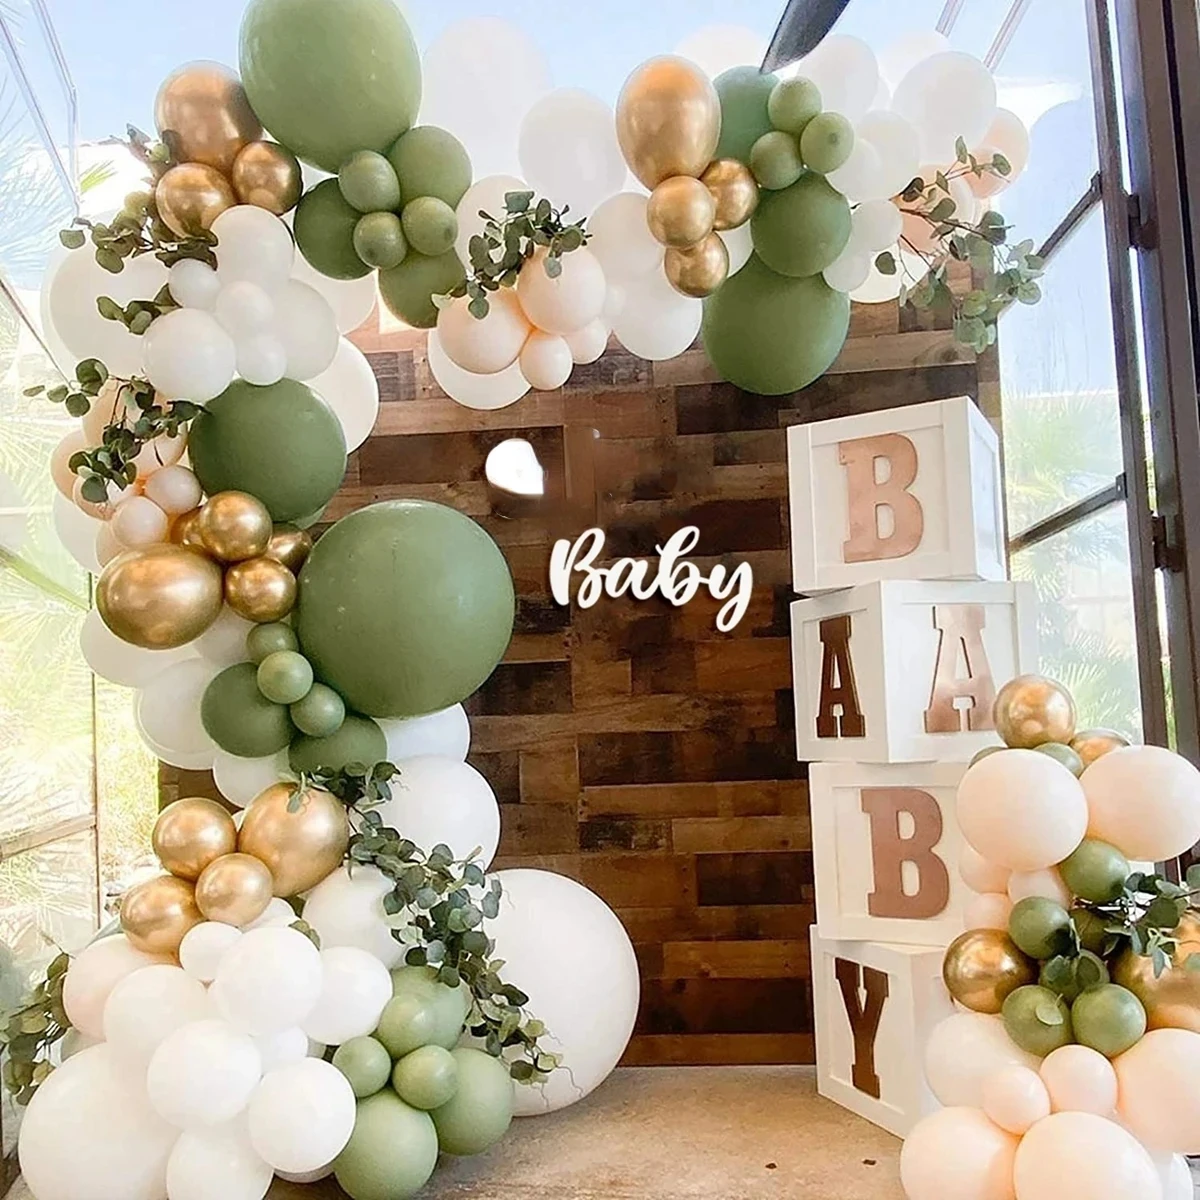 

Charming Perfect Wedding Balloons Garland Arch Decoration Kit - Birthday Party Accessories For Baby Shower, Add Colorful Life to